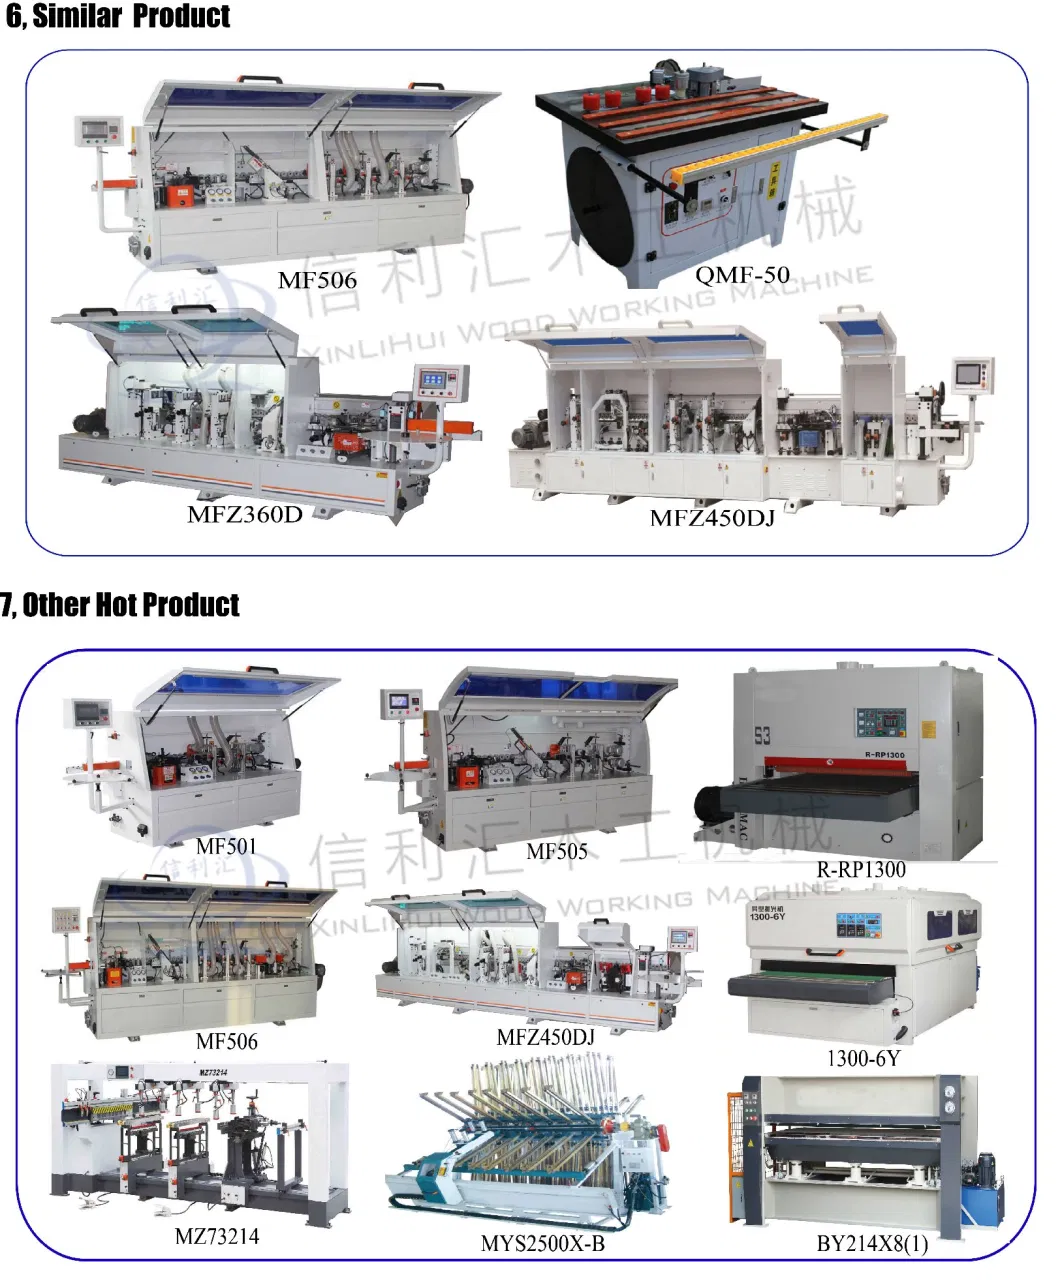 OEM Industrial Central Dust Collection Equipment with Auto Pulse Dust Cleaning System Industrial Centralized Dust Collection System for Cement Mills